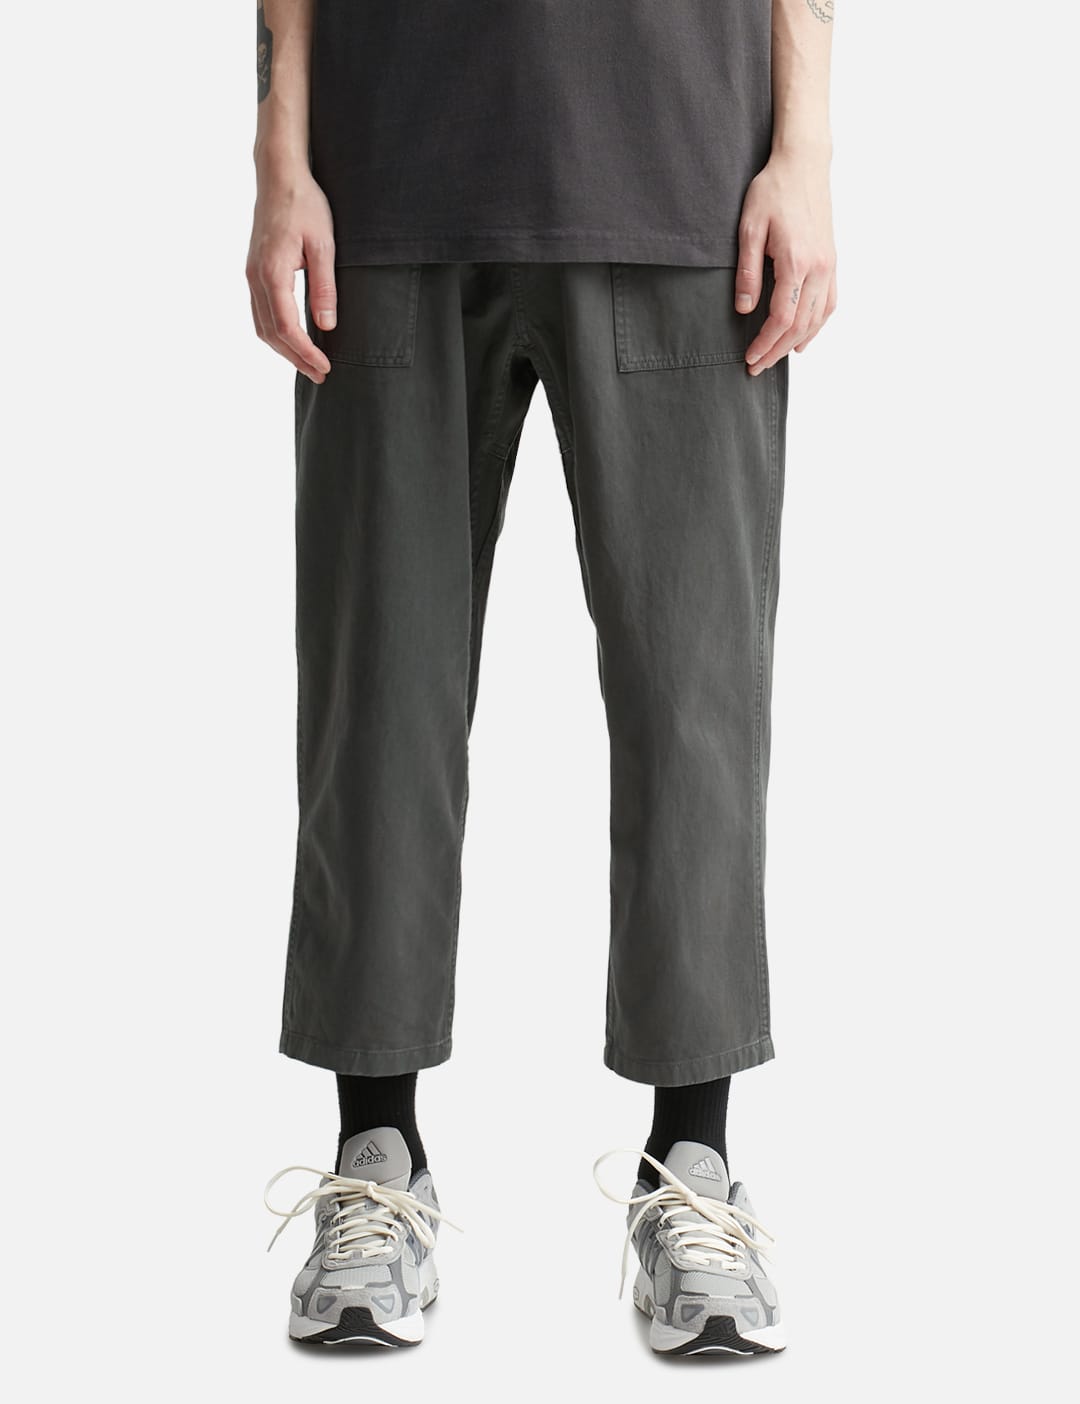 Gramicci   LOOSE TAPERED PANT   HBX   Globally Curated Fashion and